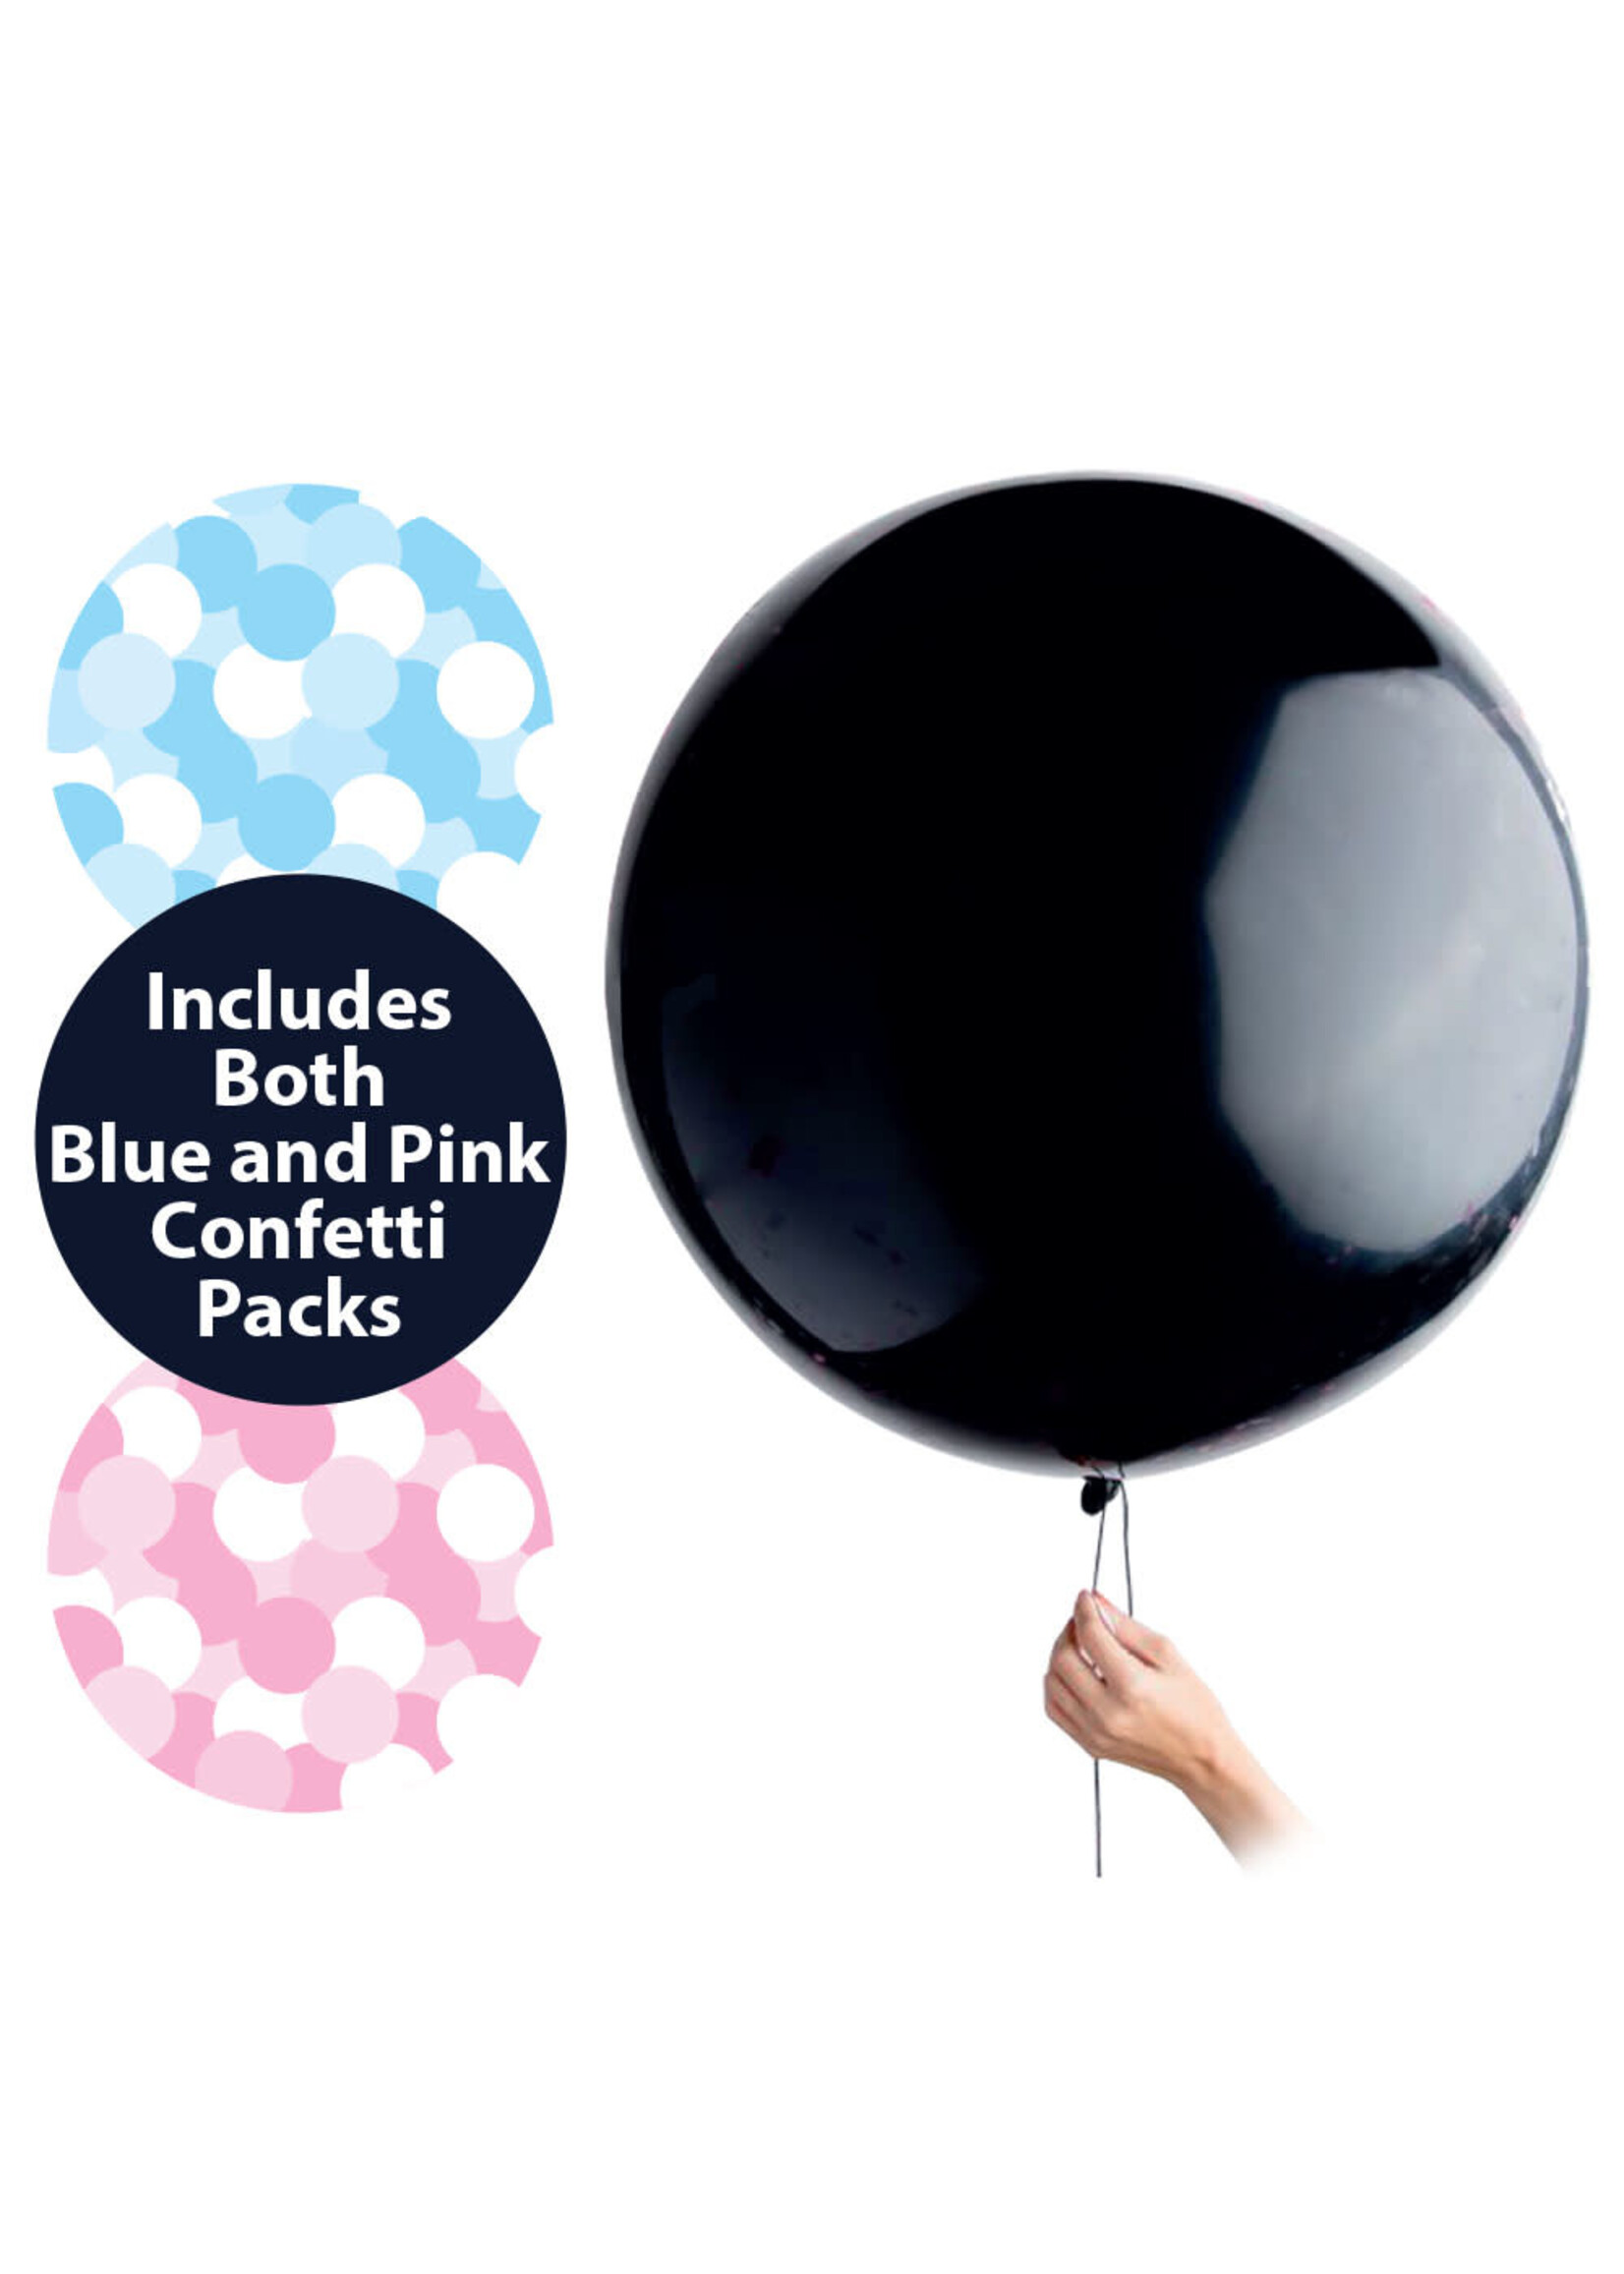 Party Supply USA 36 IN GENDER REVEAL BALLOON